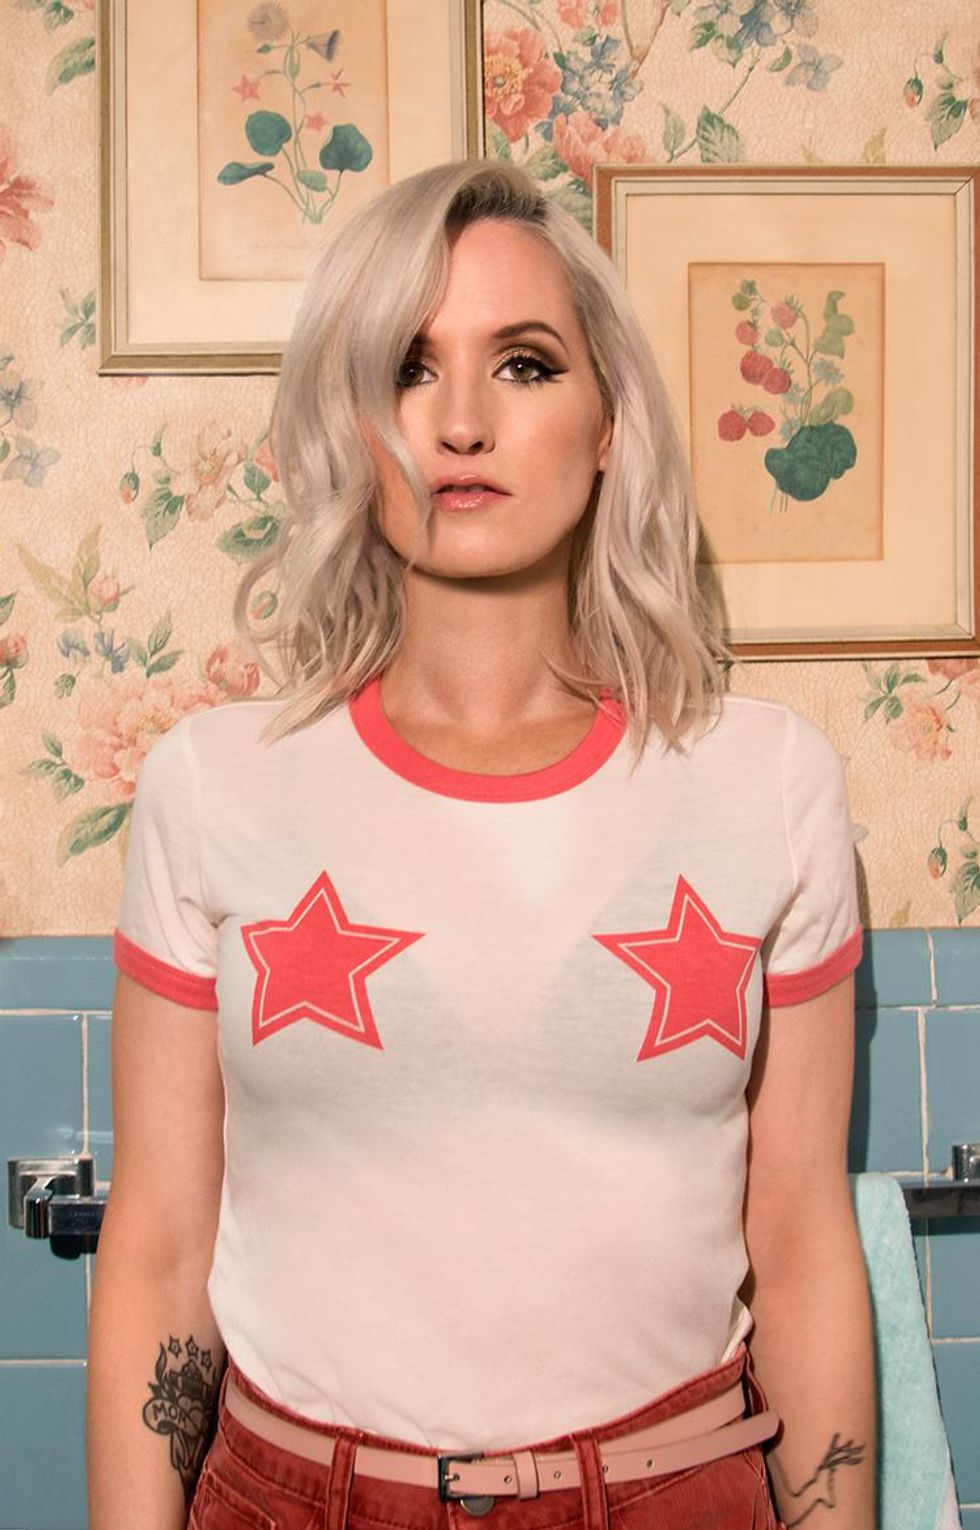 Ingrid Michaelson's New Queer Video Was Inspired by 'Stranger Things'